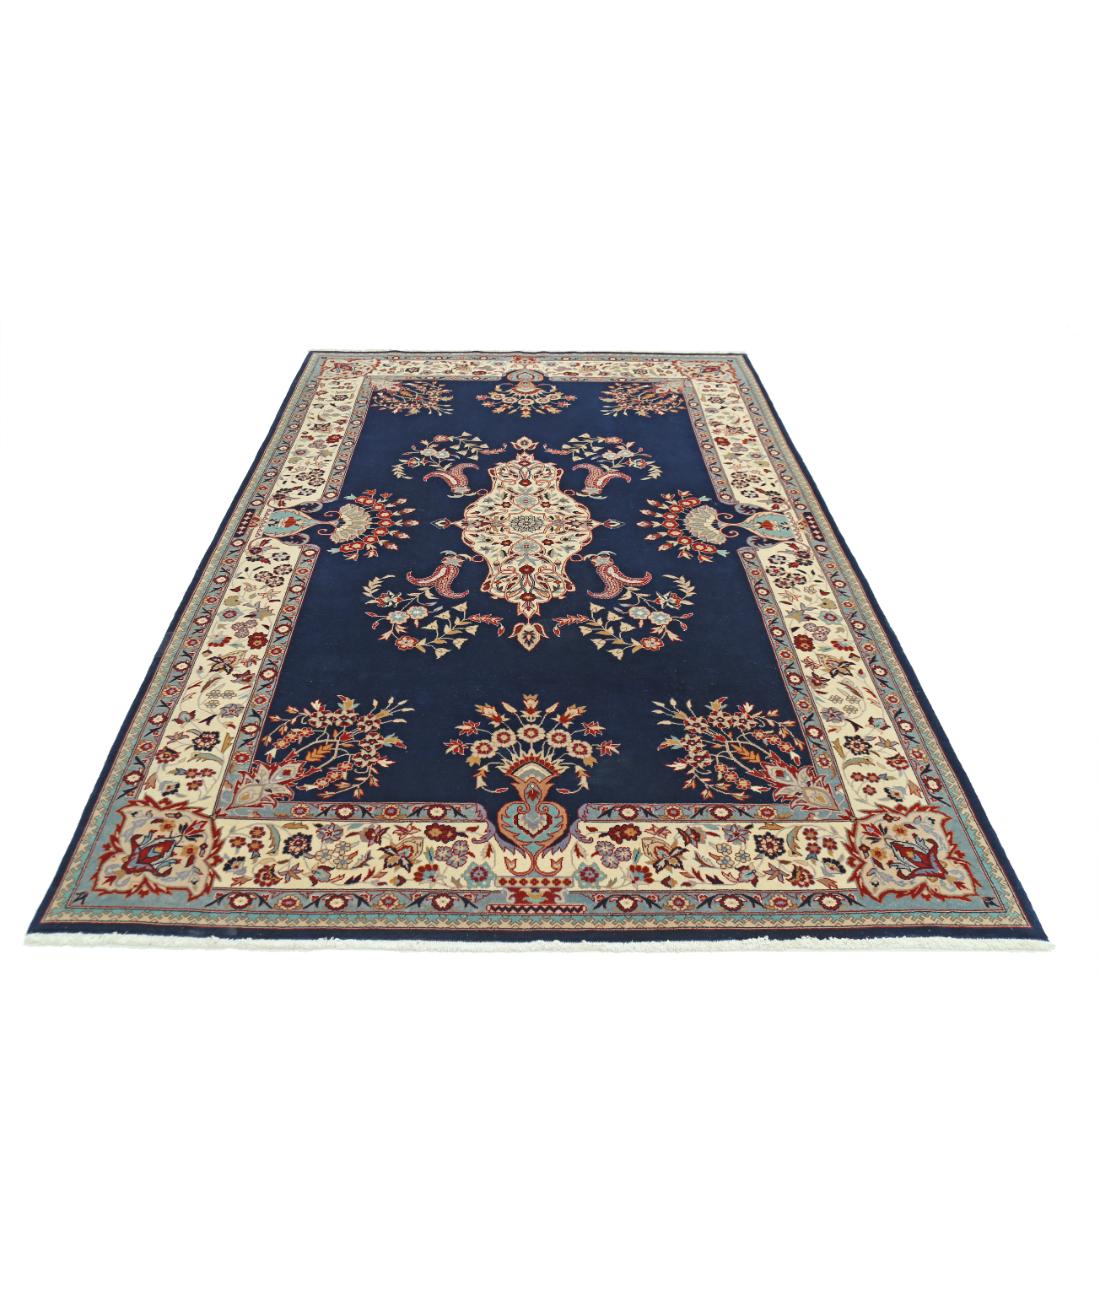 Heritage 5' 11" X 8' 11" Hand-Knotted Wool Rug 5' 11" X 8' 11" (180 X 272) / Blue / Ivory